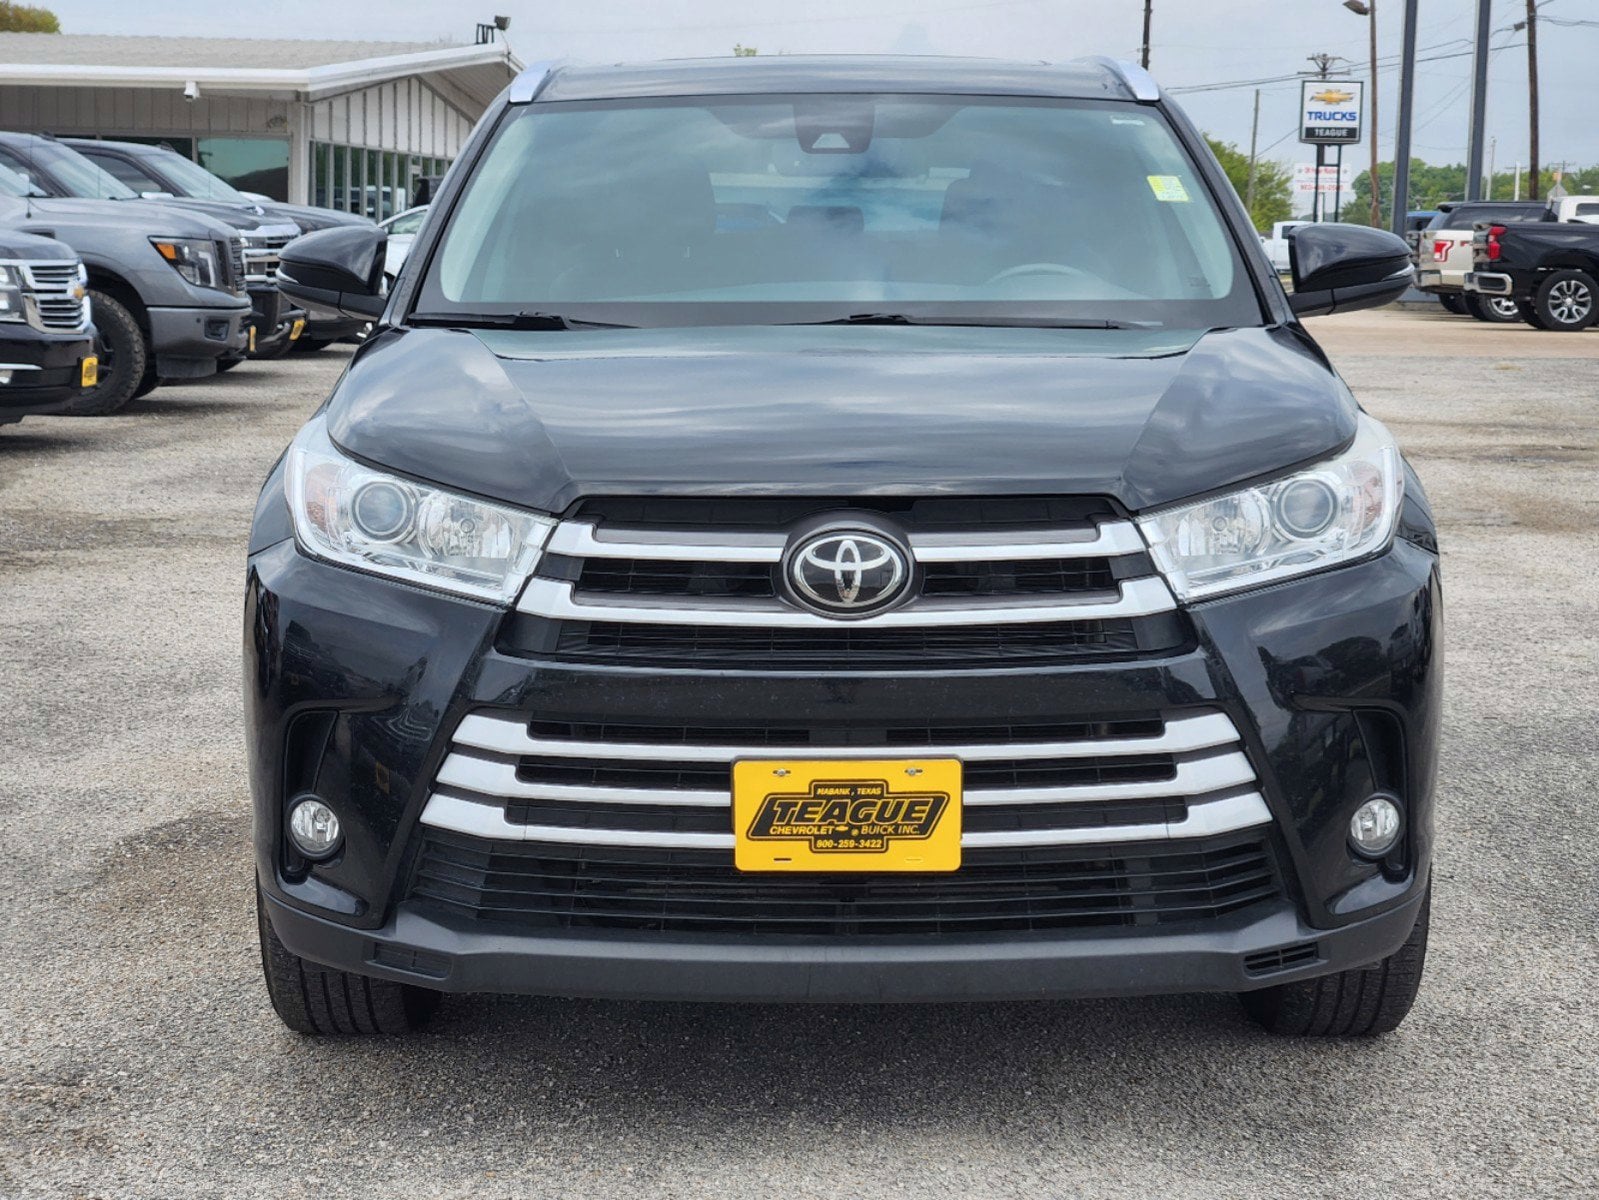 Used 2018 Toyota Highlander XLE with VIN 5TDKZRFH5JS546372 for sale in Mabank, TX